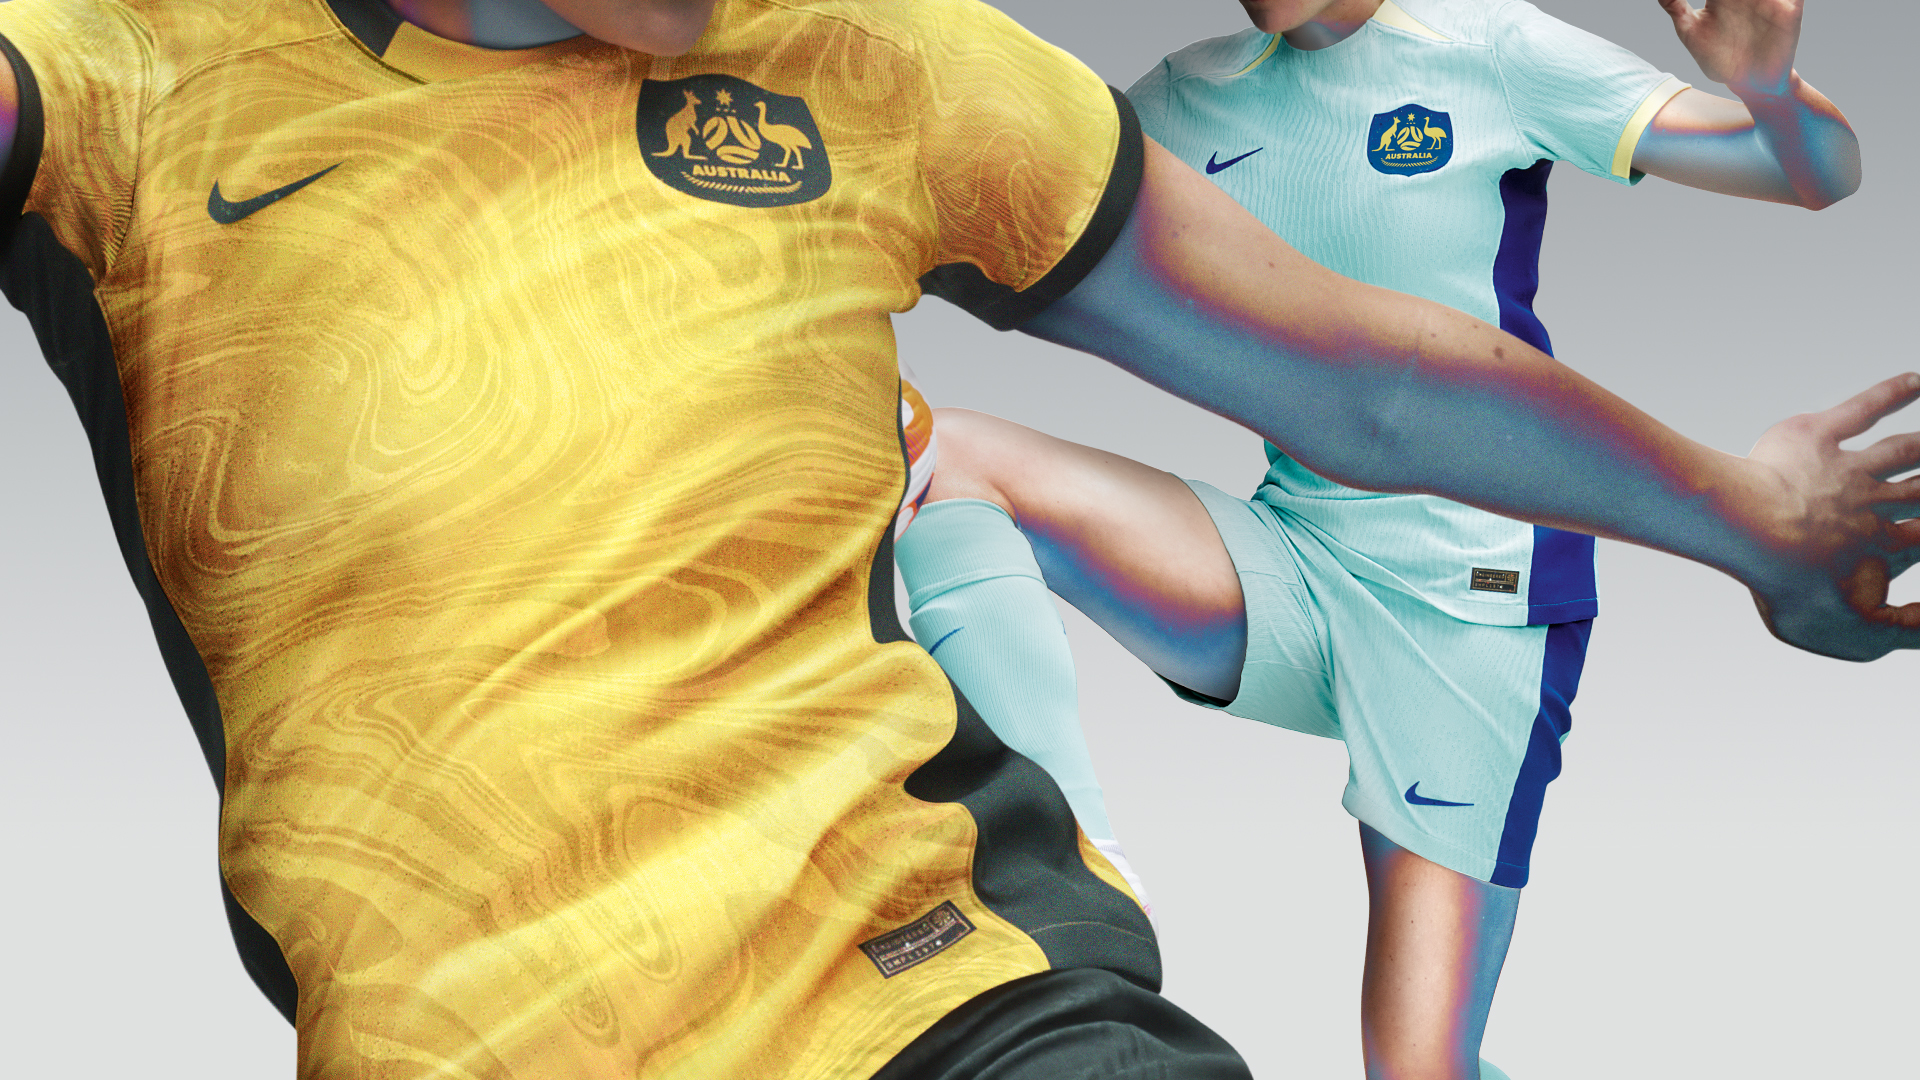 Every FIFA Women's World Cup Uniform, Ranked